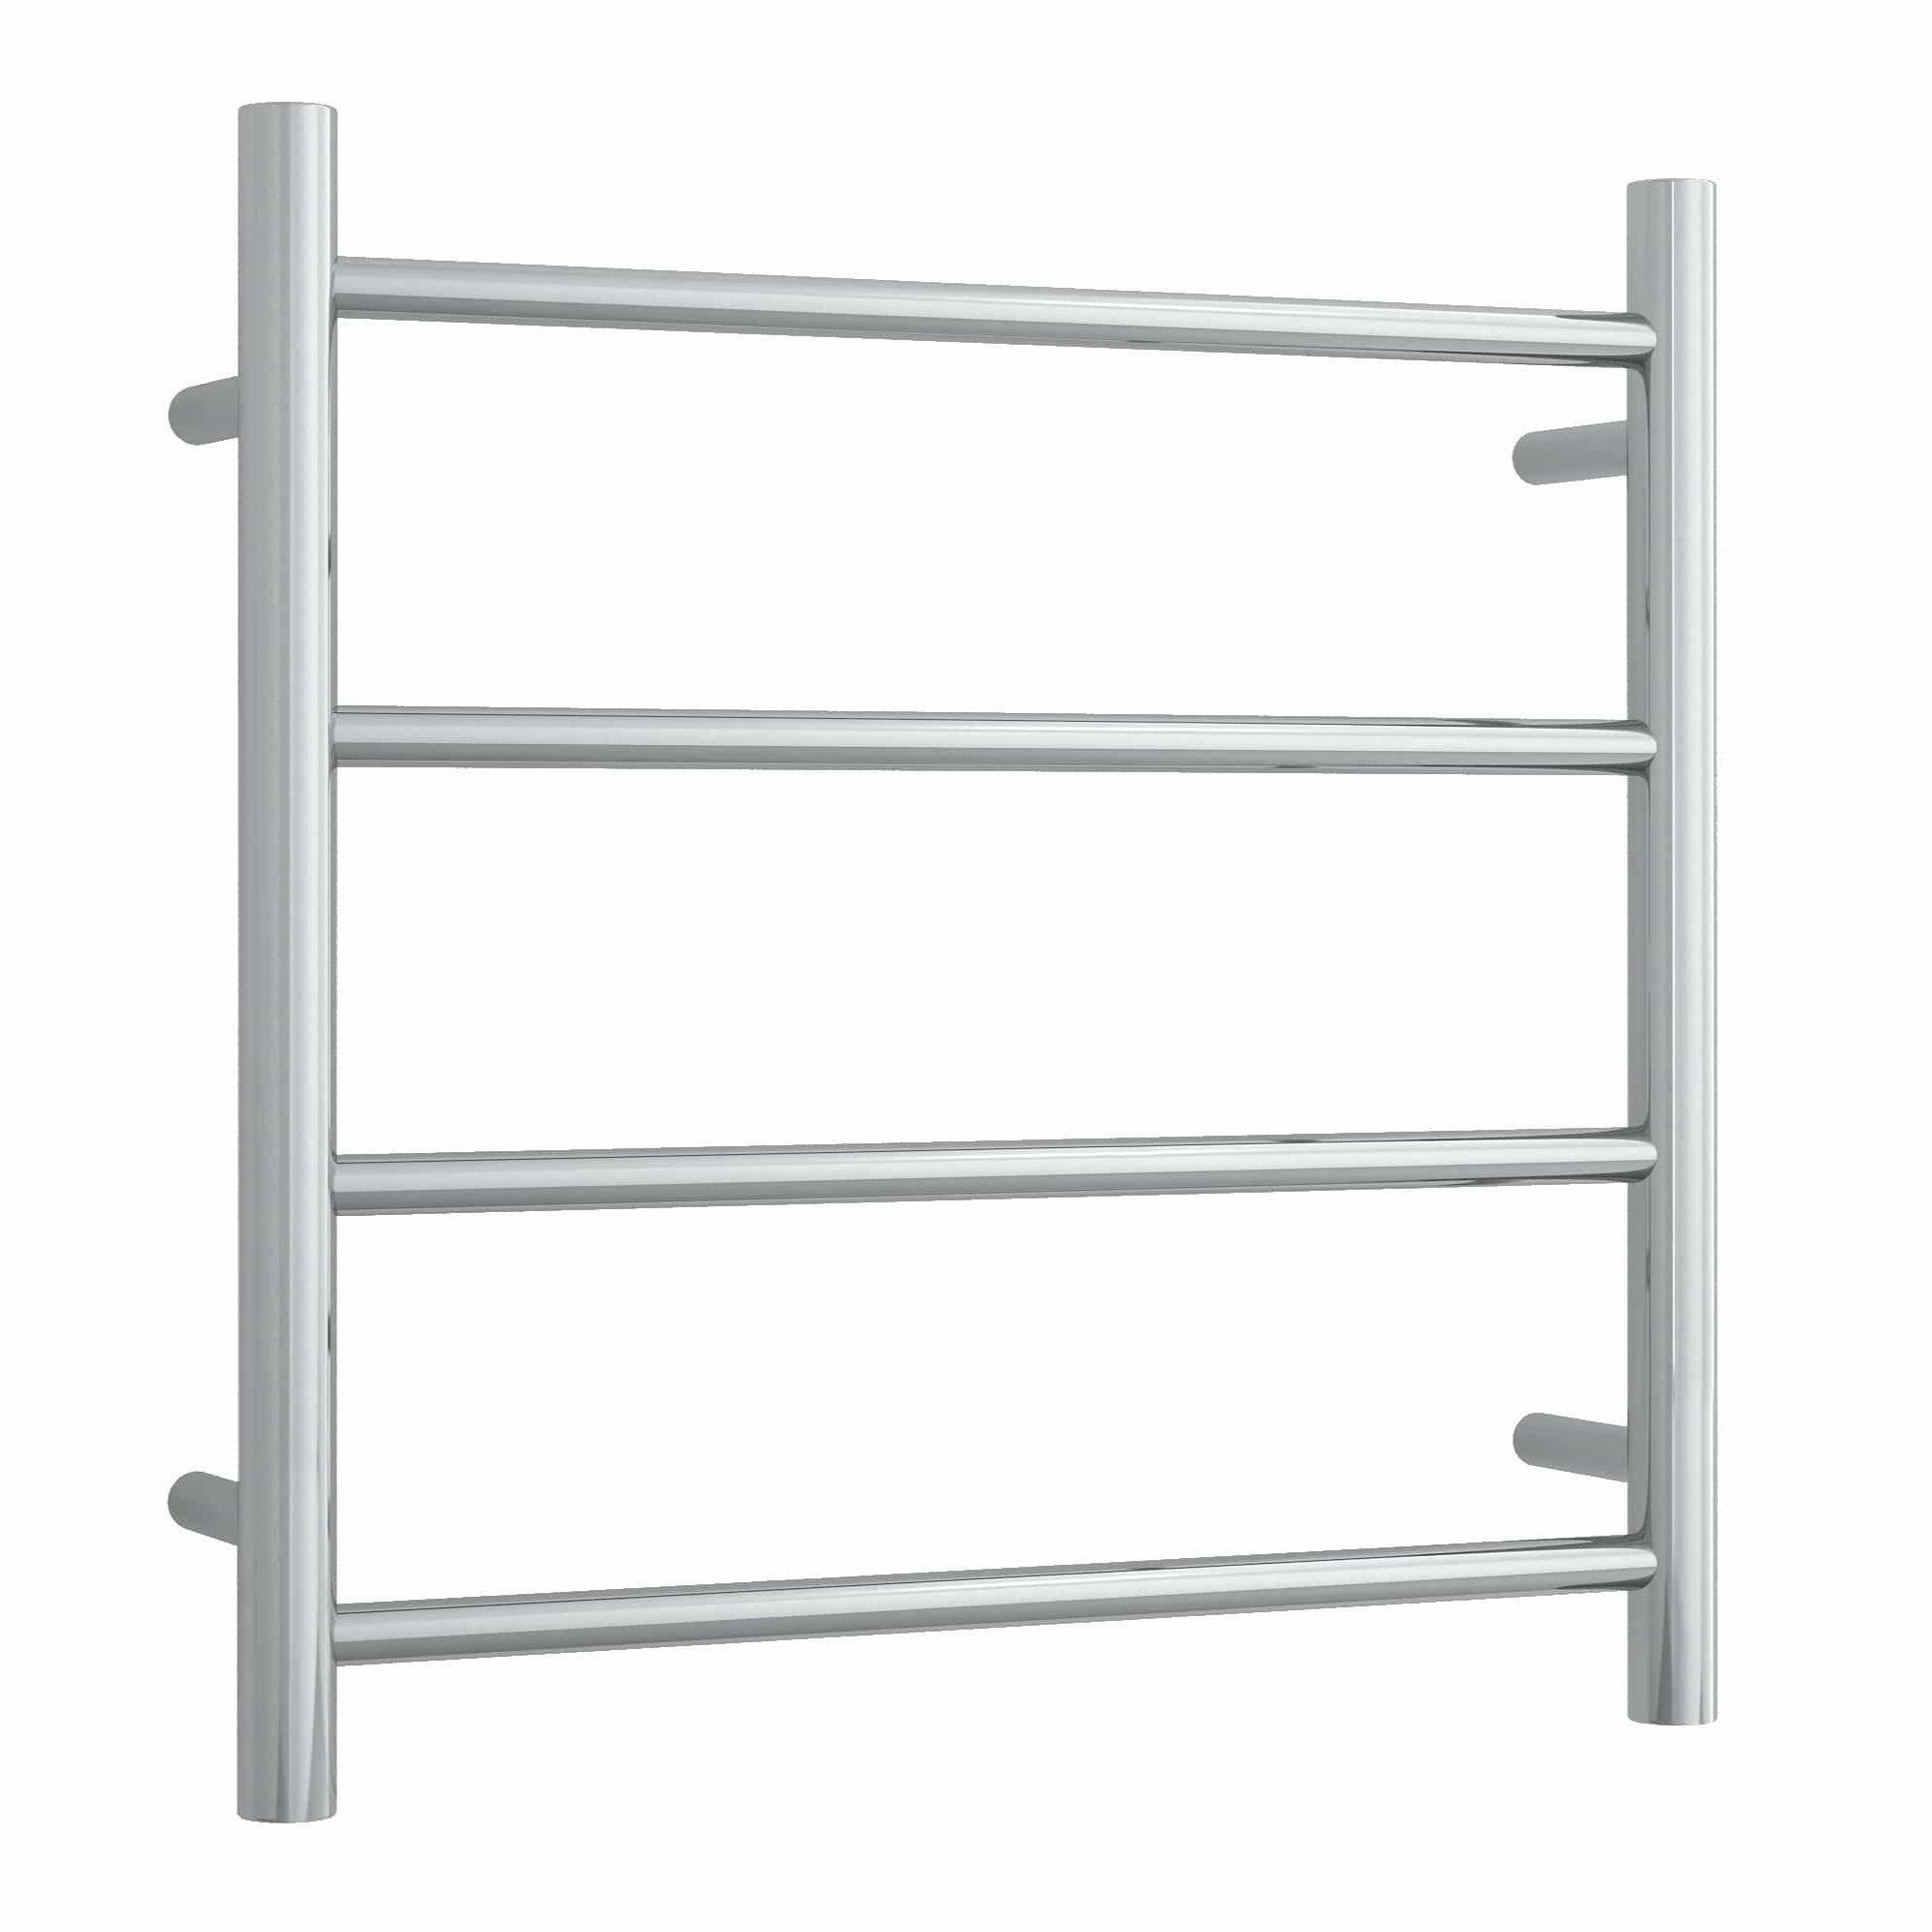 THERMOGROUP CHROME STRAIGHT ROUND LADDER HEATED TOWEL RAIL 550MM